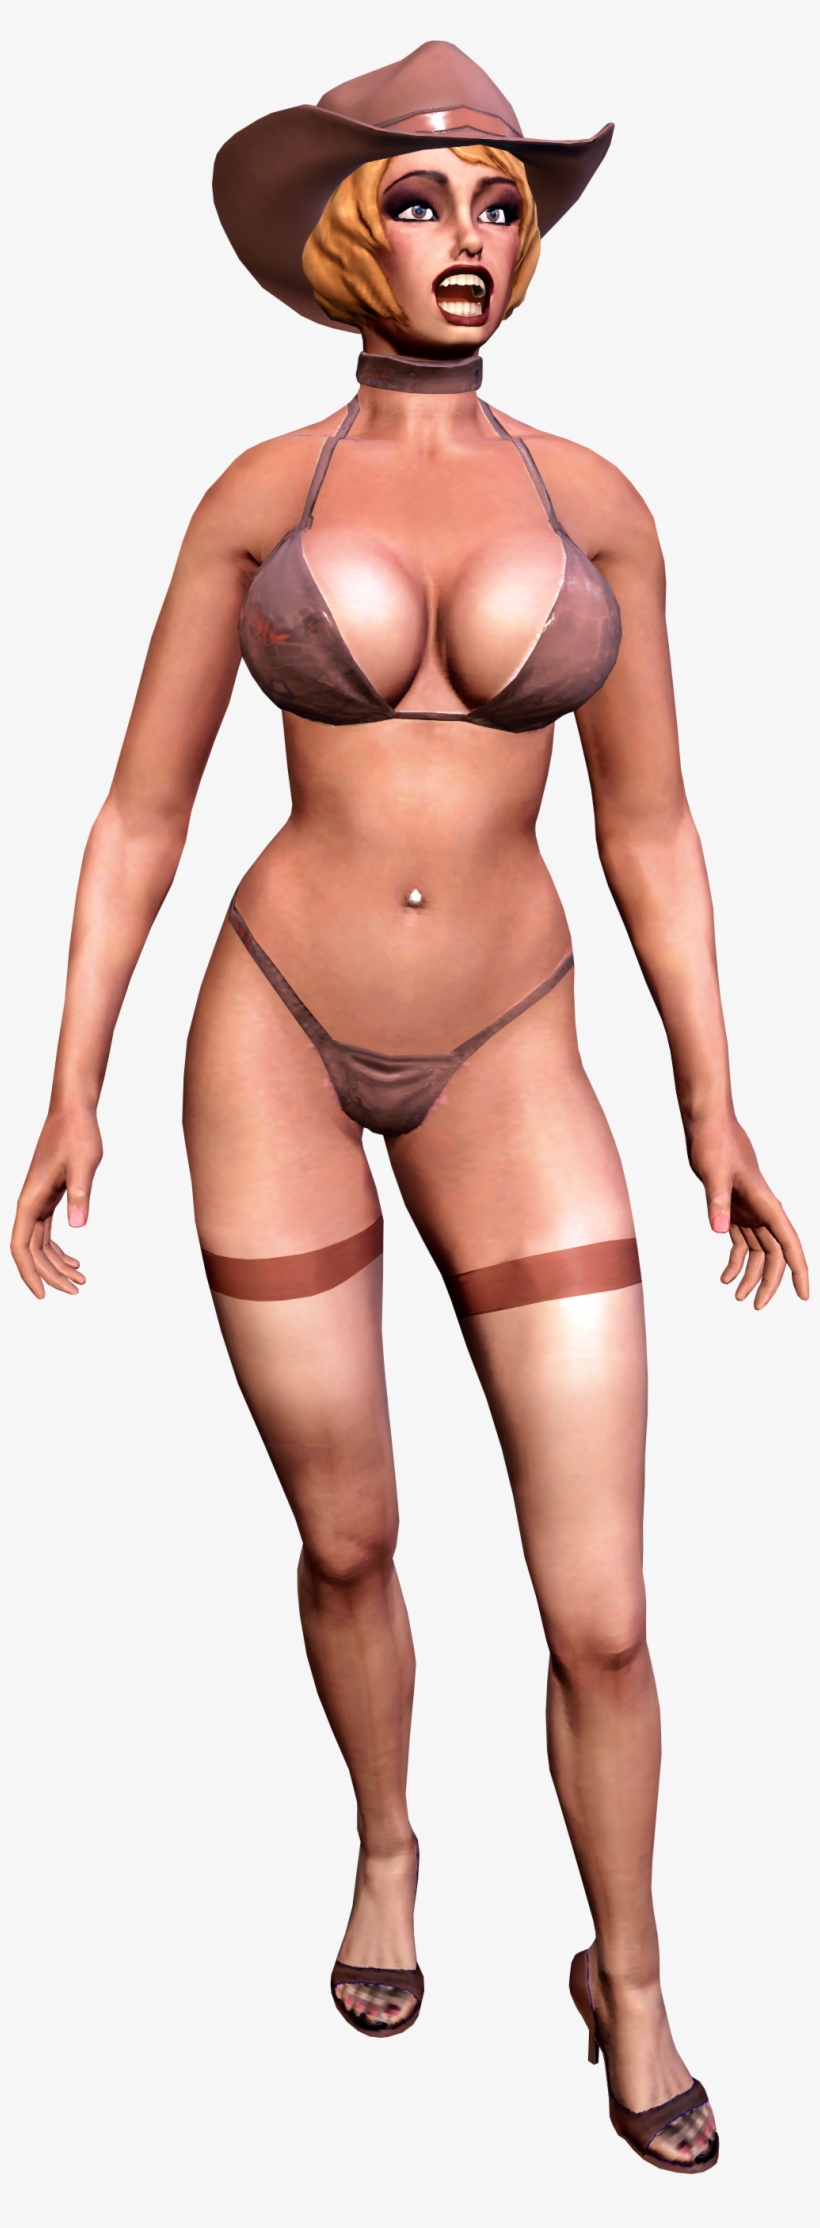 Stripper Girl Png Clip Royalty Free Stock - Saints Row The Third Strippers, transparent png #4800745